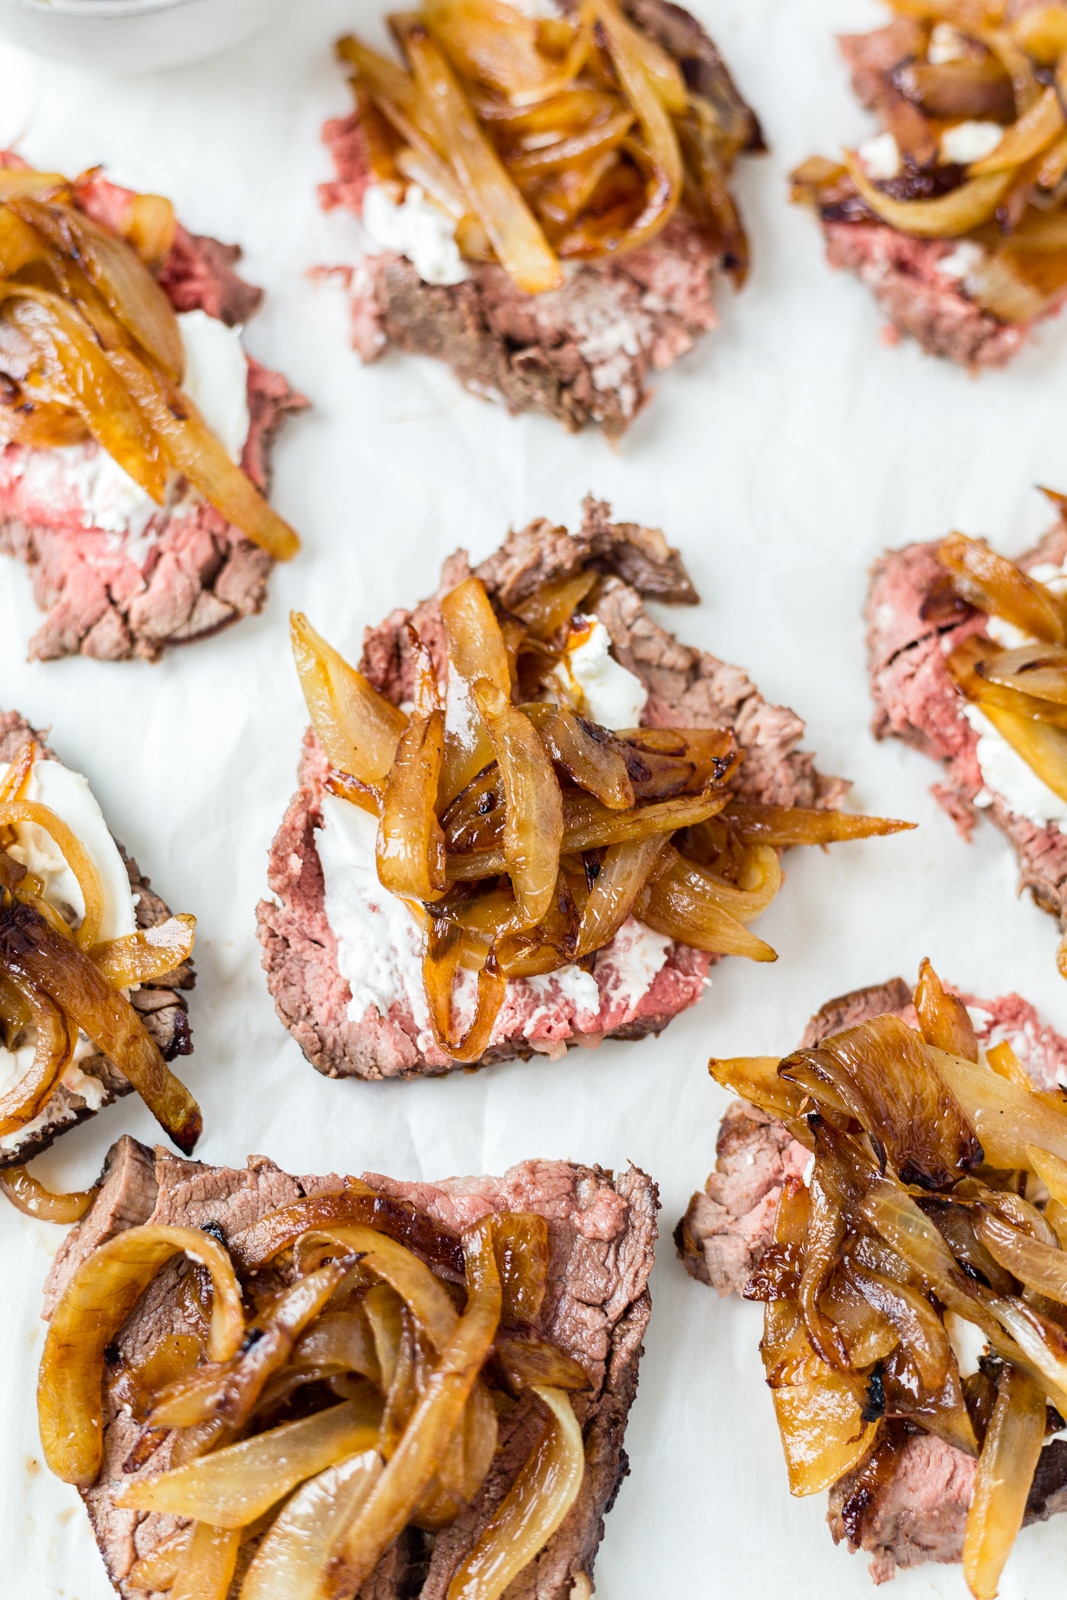 8 pieces of thinly sliced beef tenderloin on a cutting board topped with goat cheese and caramelized onion